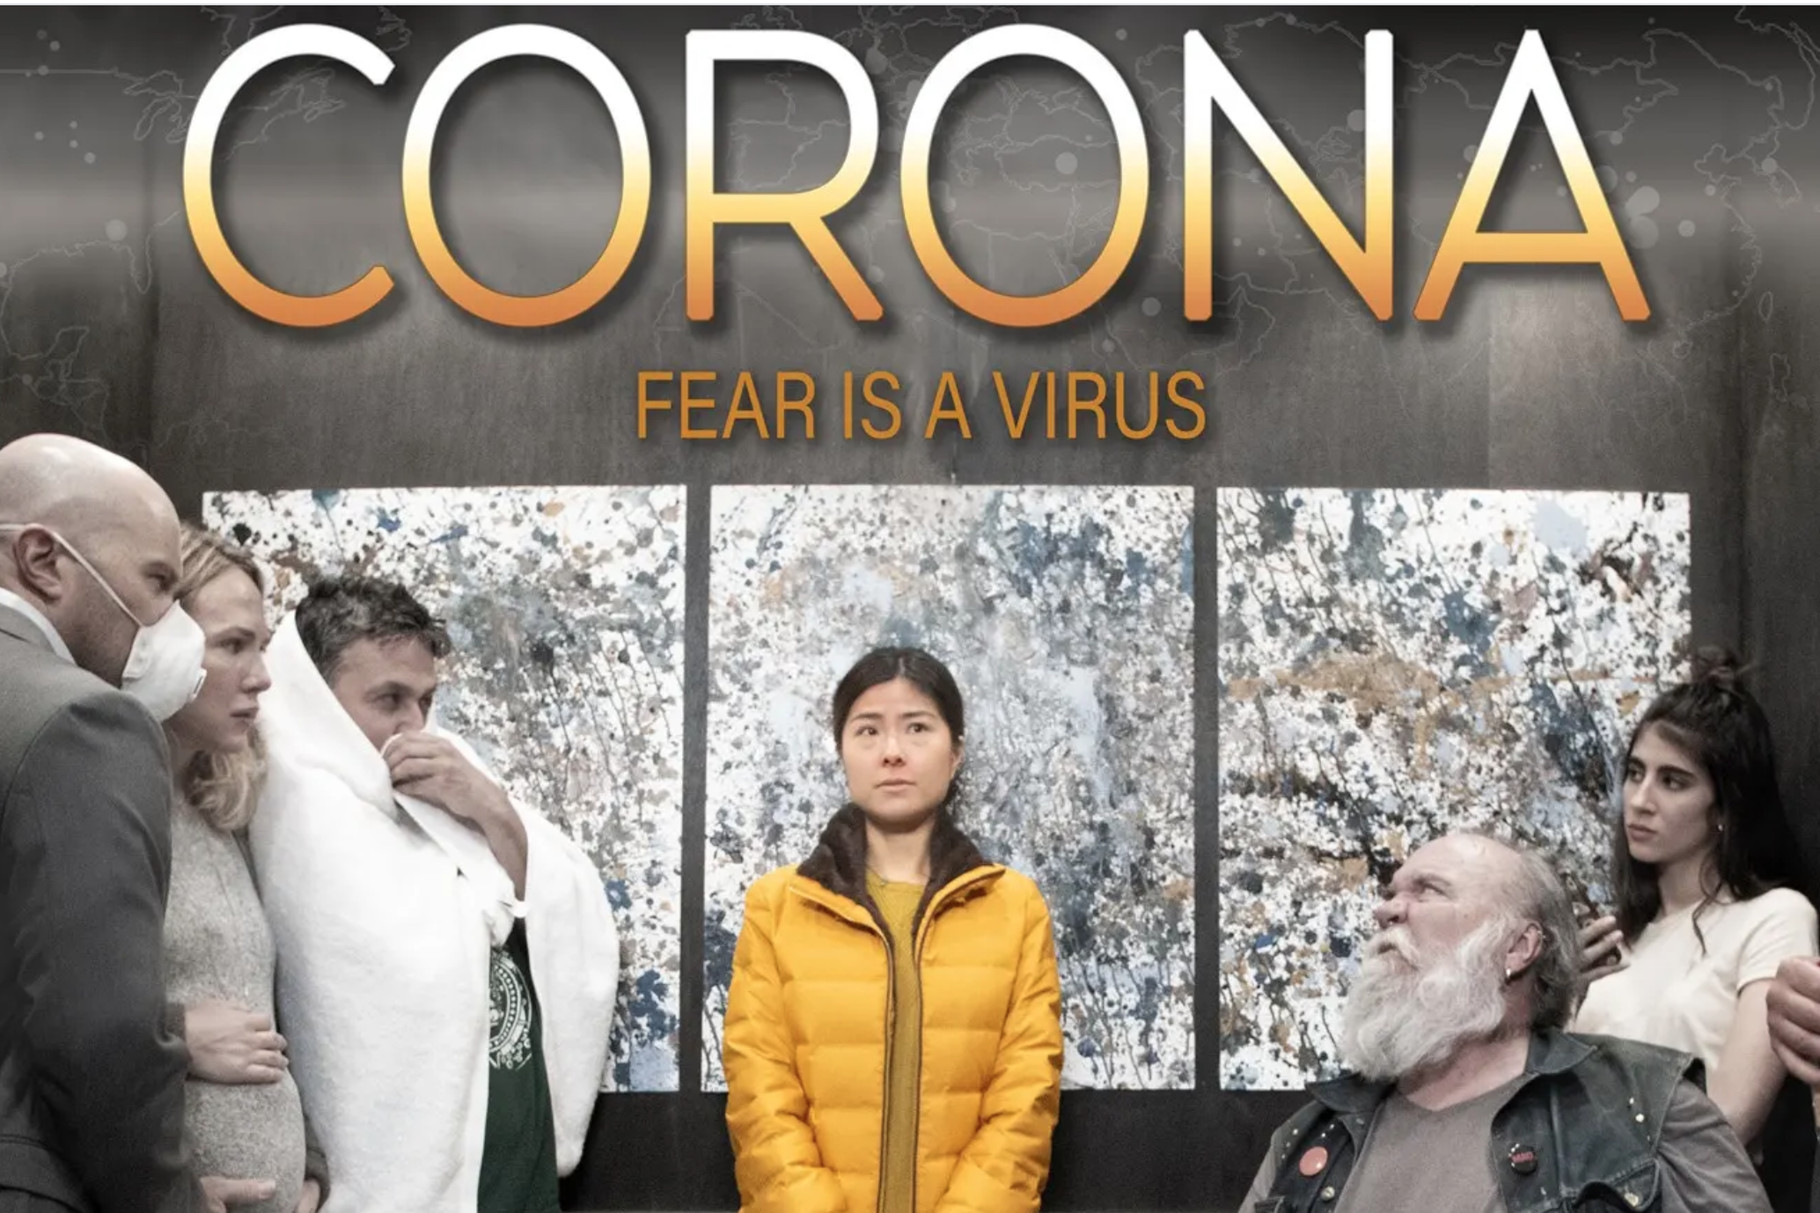 ‘Corona’ the movie has already been made, and it looks kind of bad